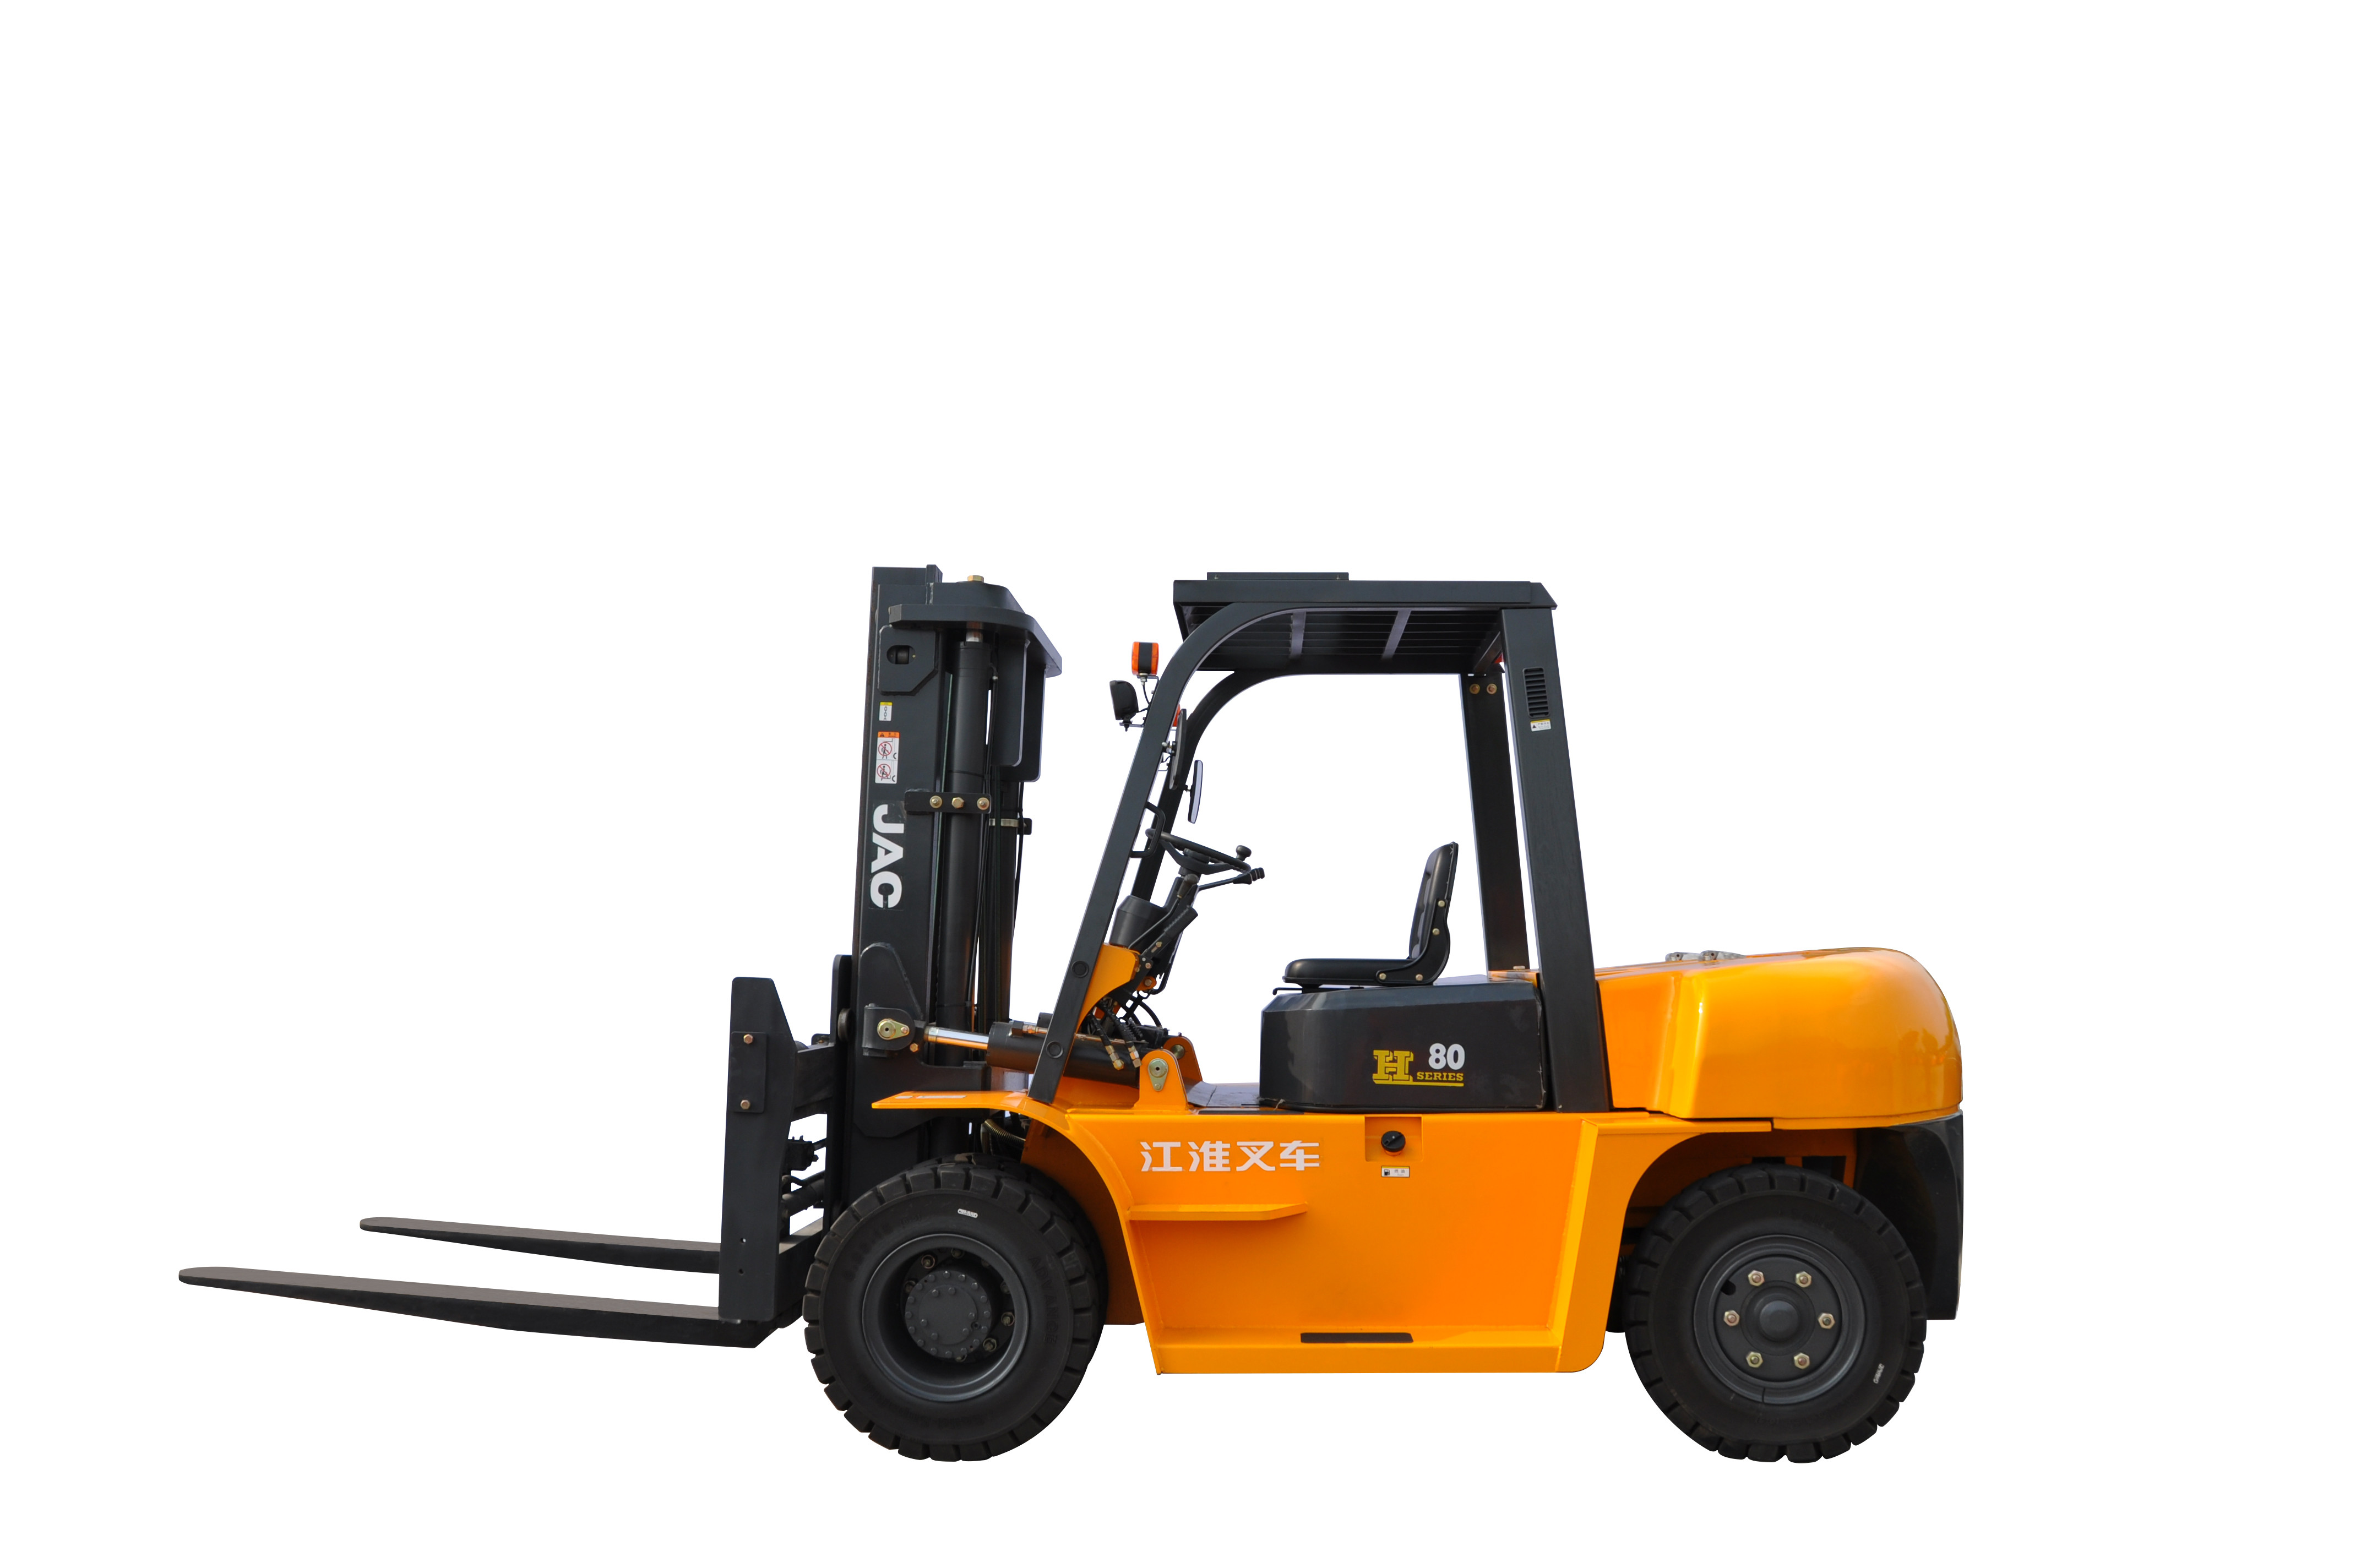 Four Wheel Drive 8 Ton Forklift Diesel Engine With Excellent Manoeuvrability